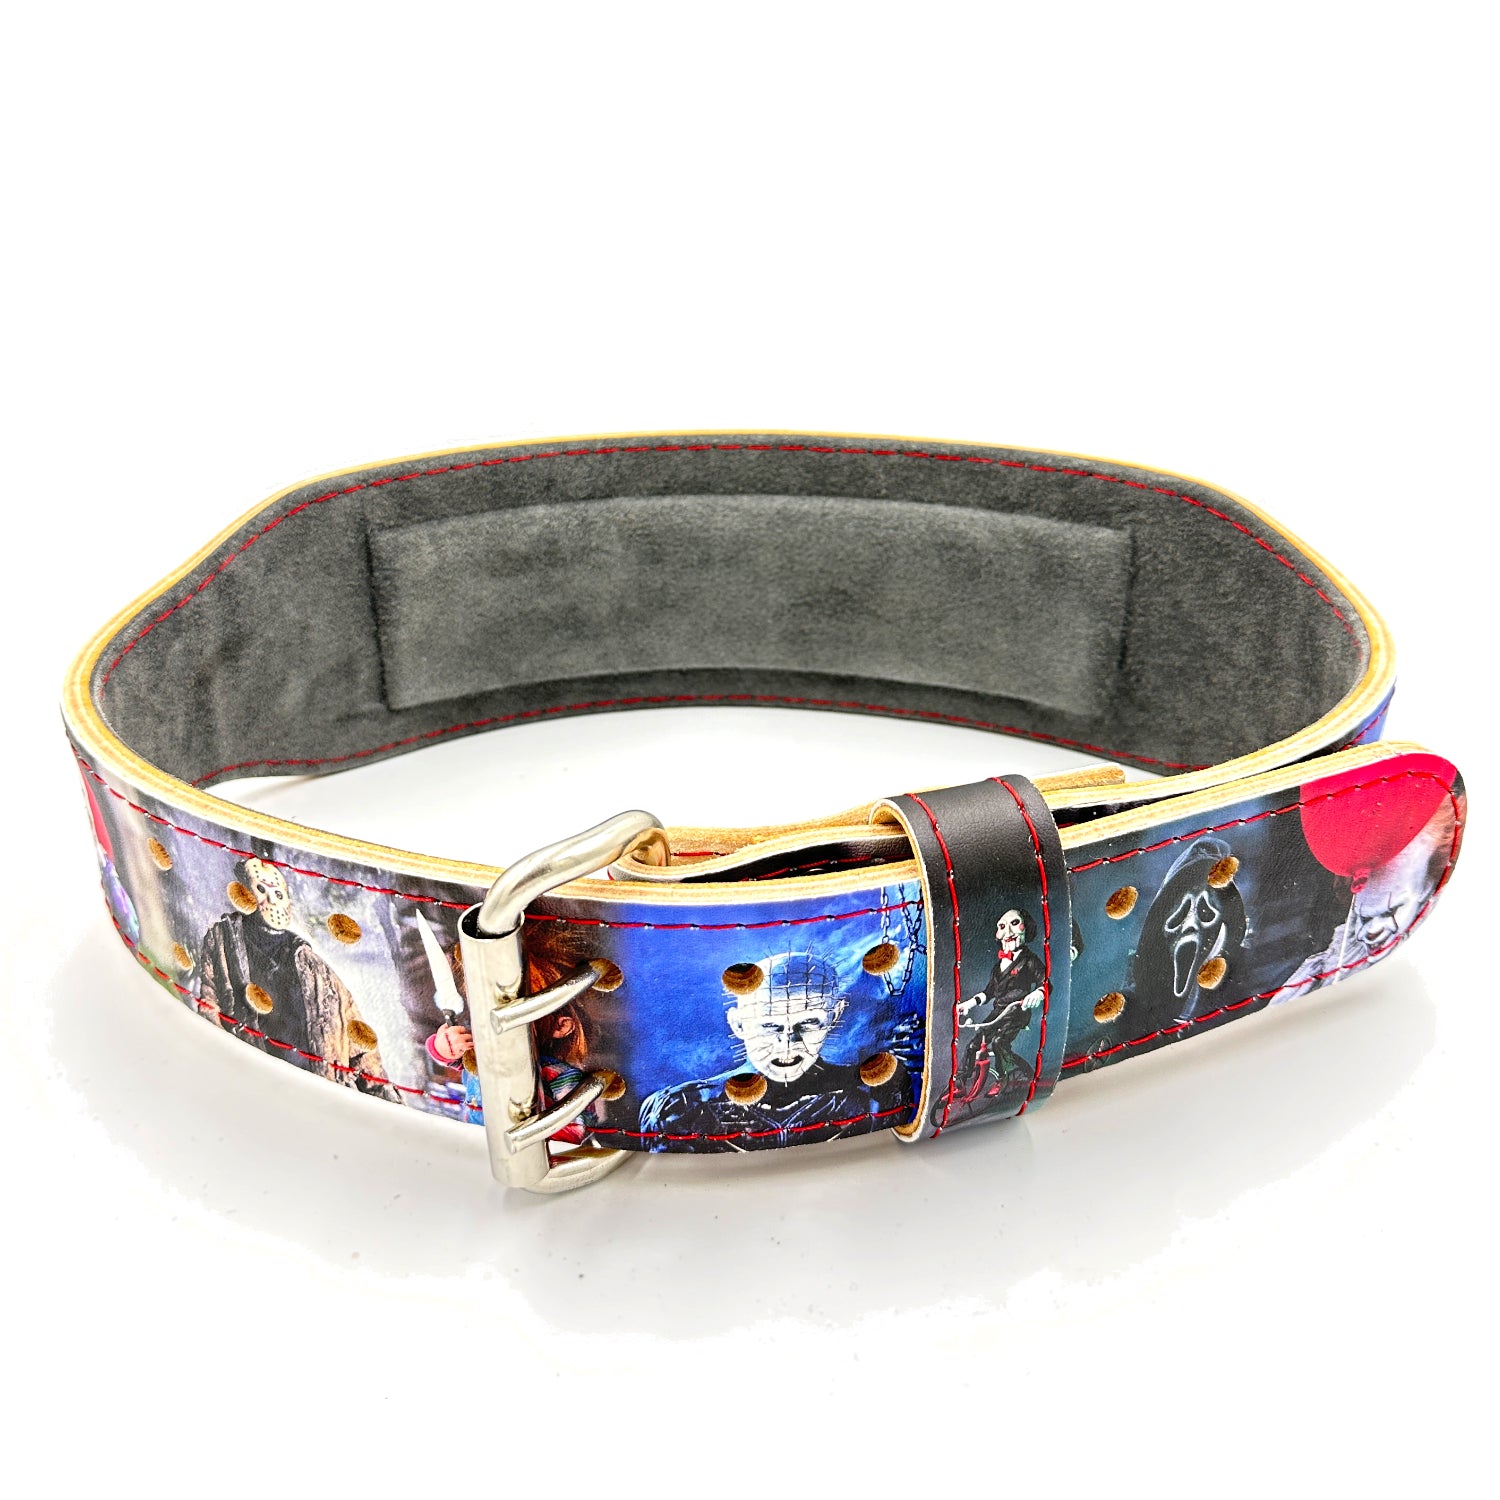 Horror Movies Weightlifting Belt - Hand Made in UK